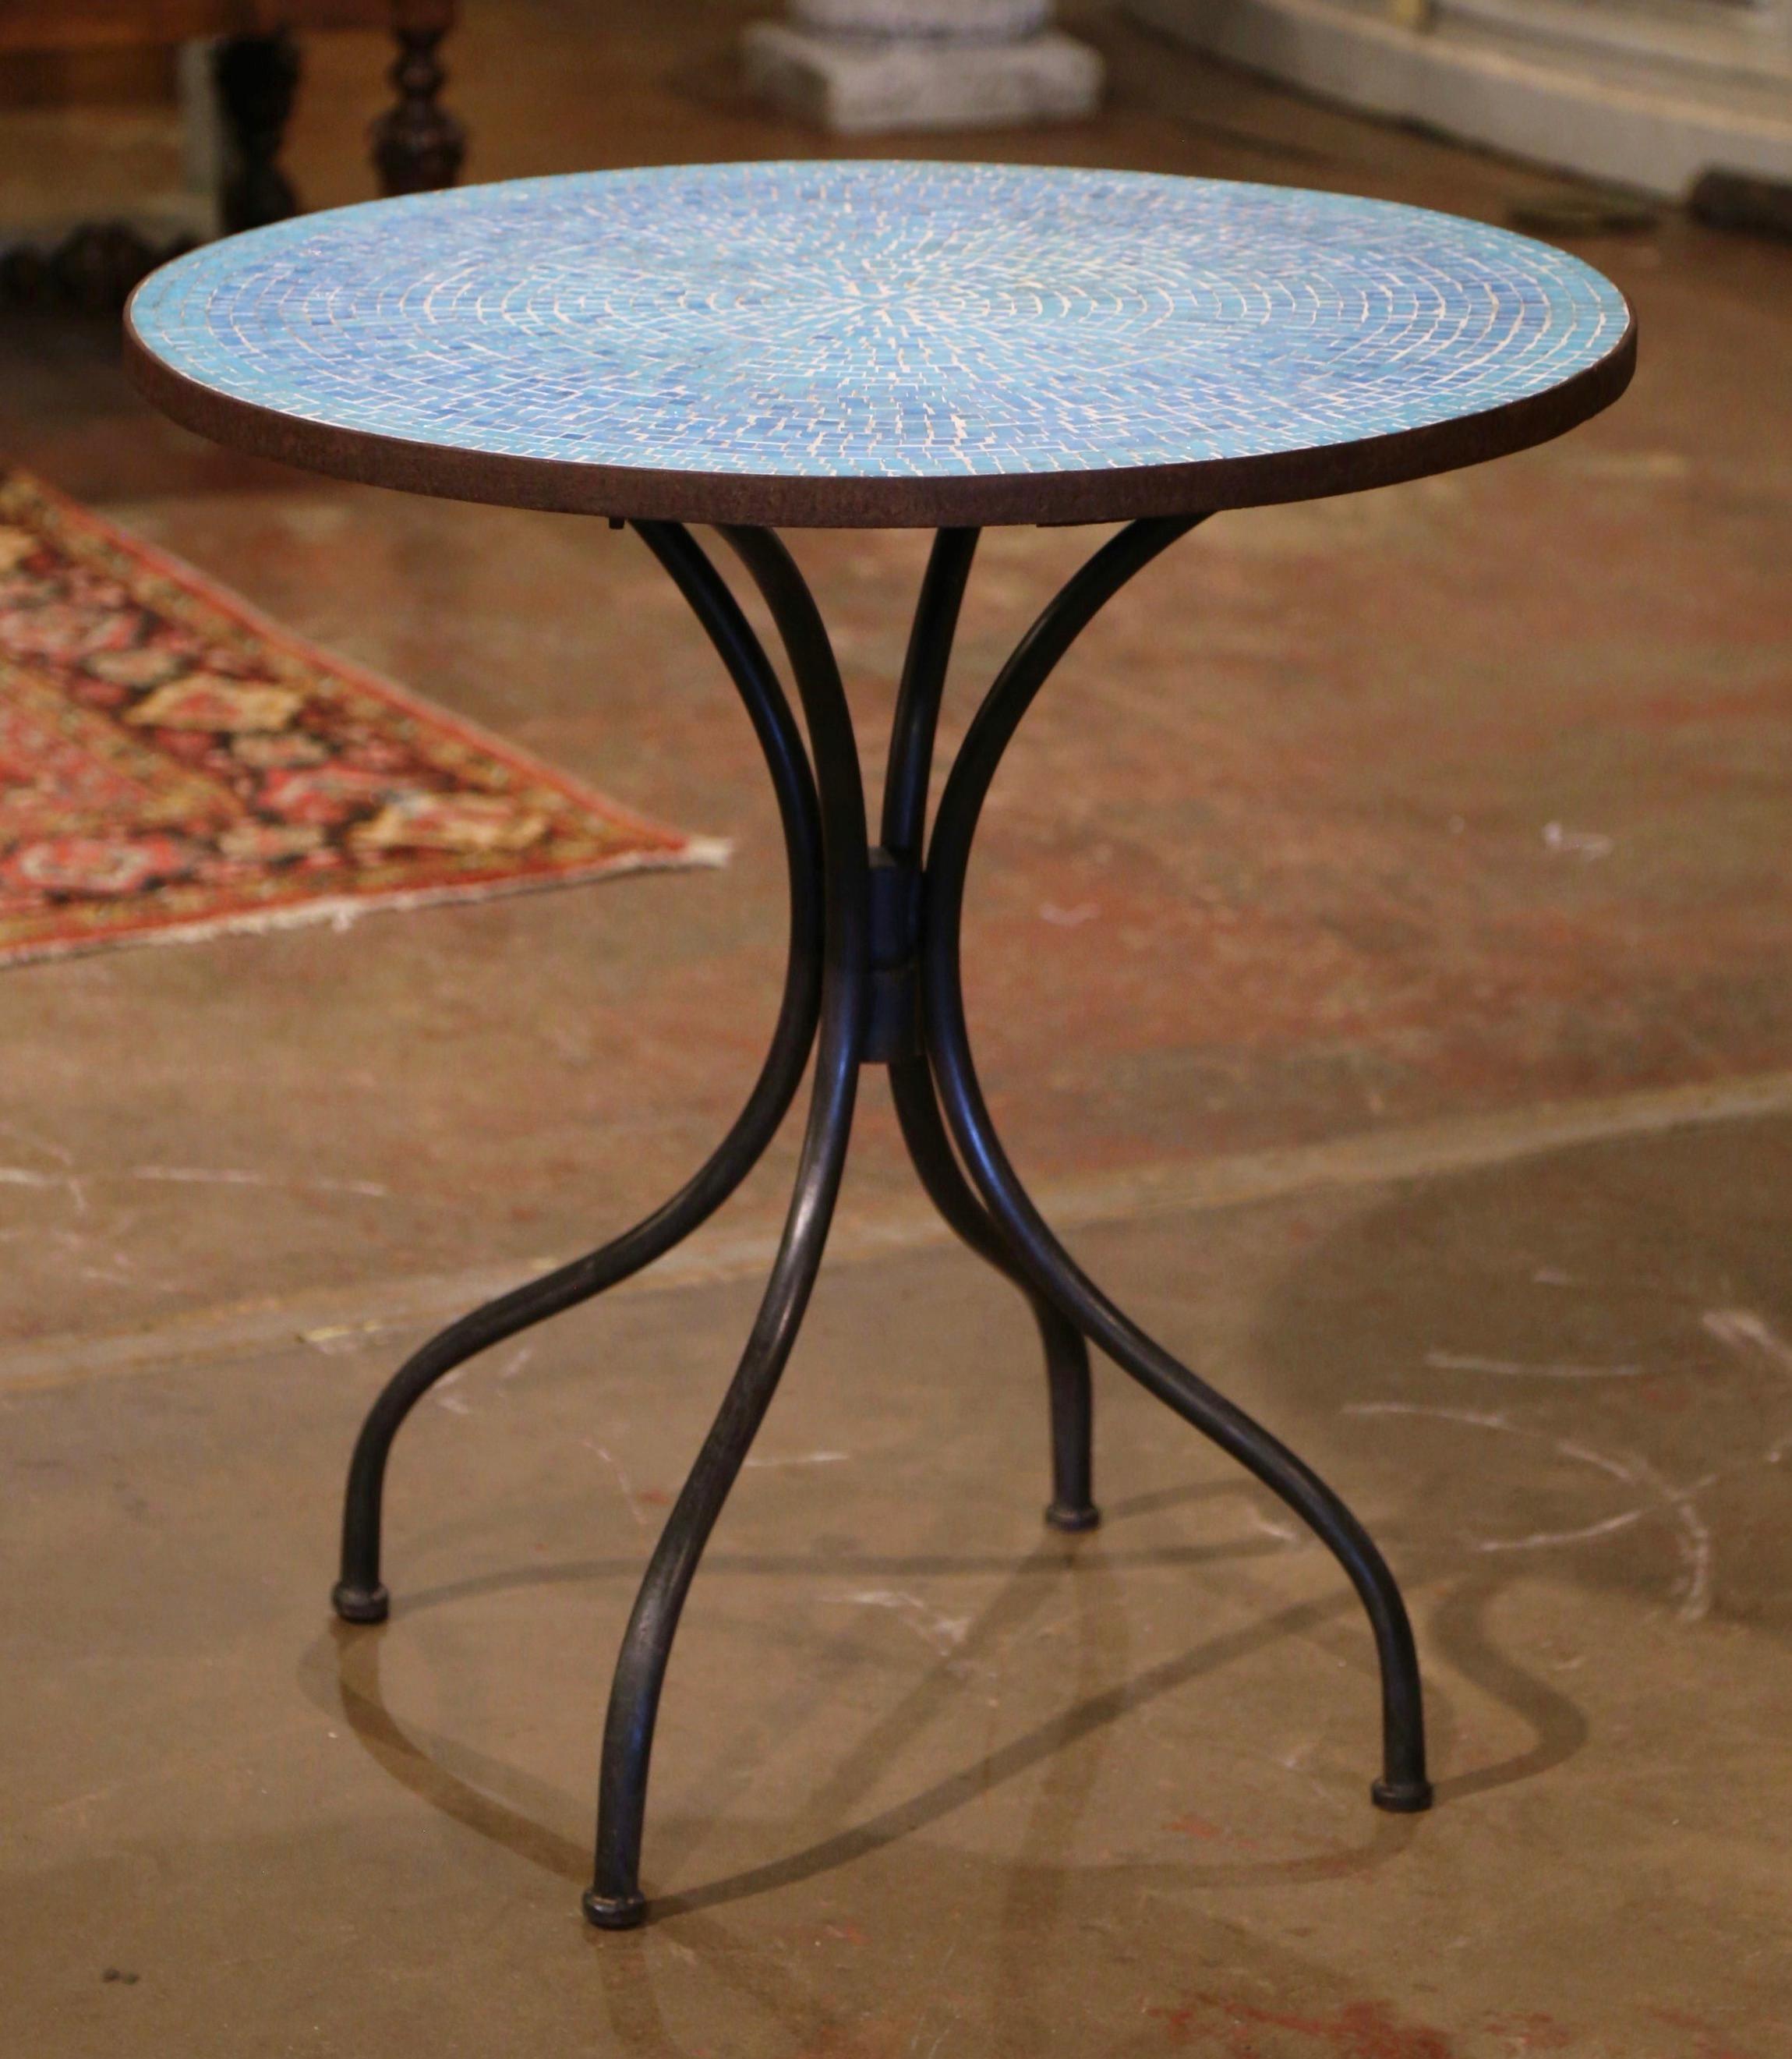 This colorful antique gueridon was crafted in France, circa 1920. The base sits on four scroll legs connected with a central stretcher. The Classic bistrot table is dressed with a circular mosaic top embellished with geometric motifs. The elegant